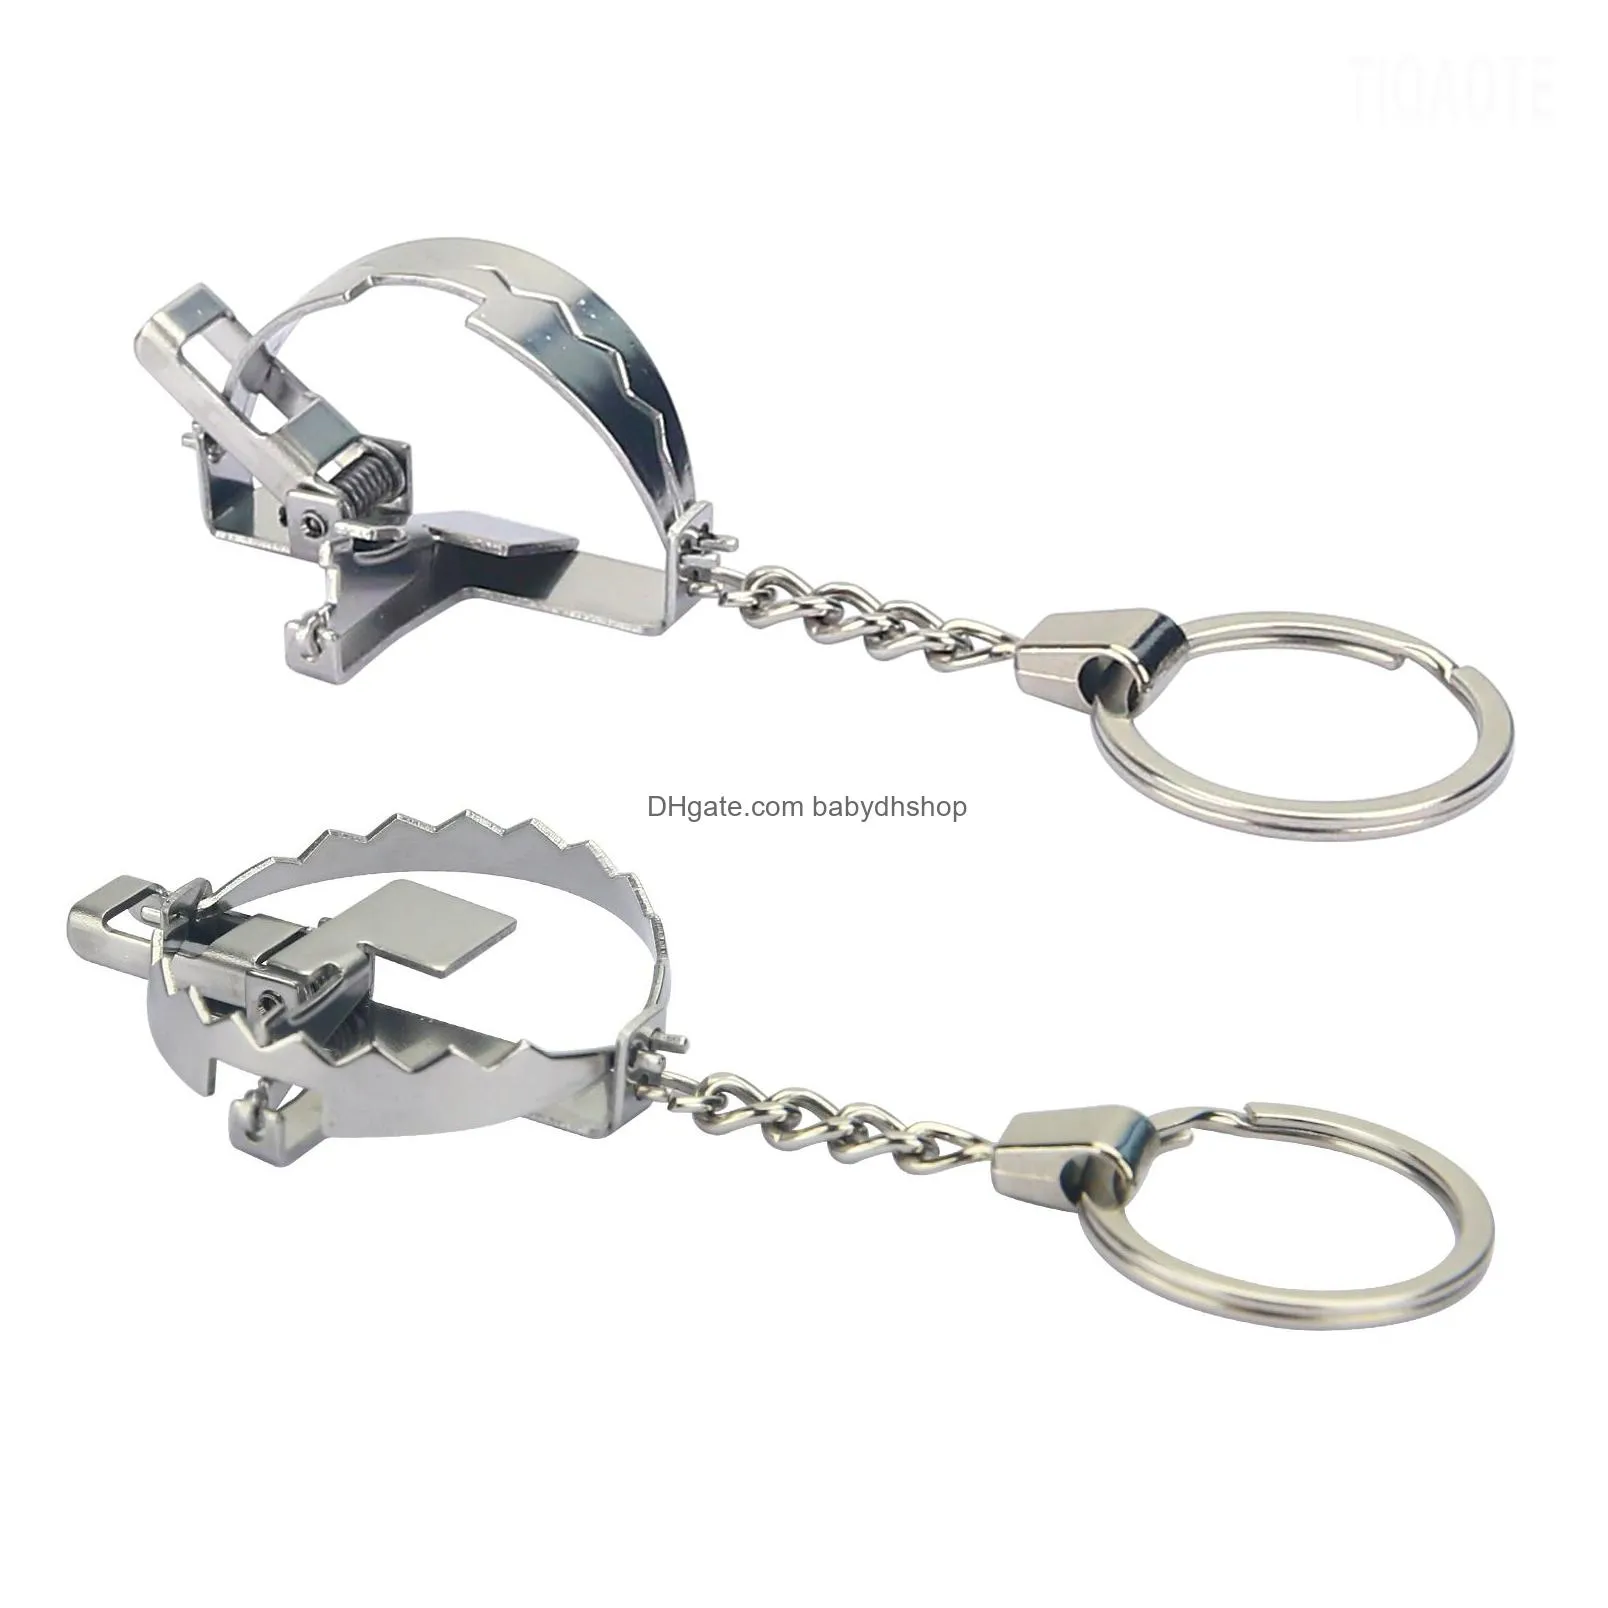 Novelty Games Mini Bear Trap Keychain That Works Fun Unzip Birthday Gift Trick Mouse 2 Drop Delivery Toys Gifts Novelty Gag Toys Dho9M